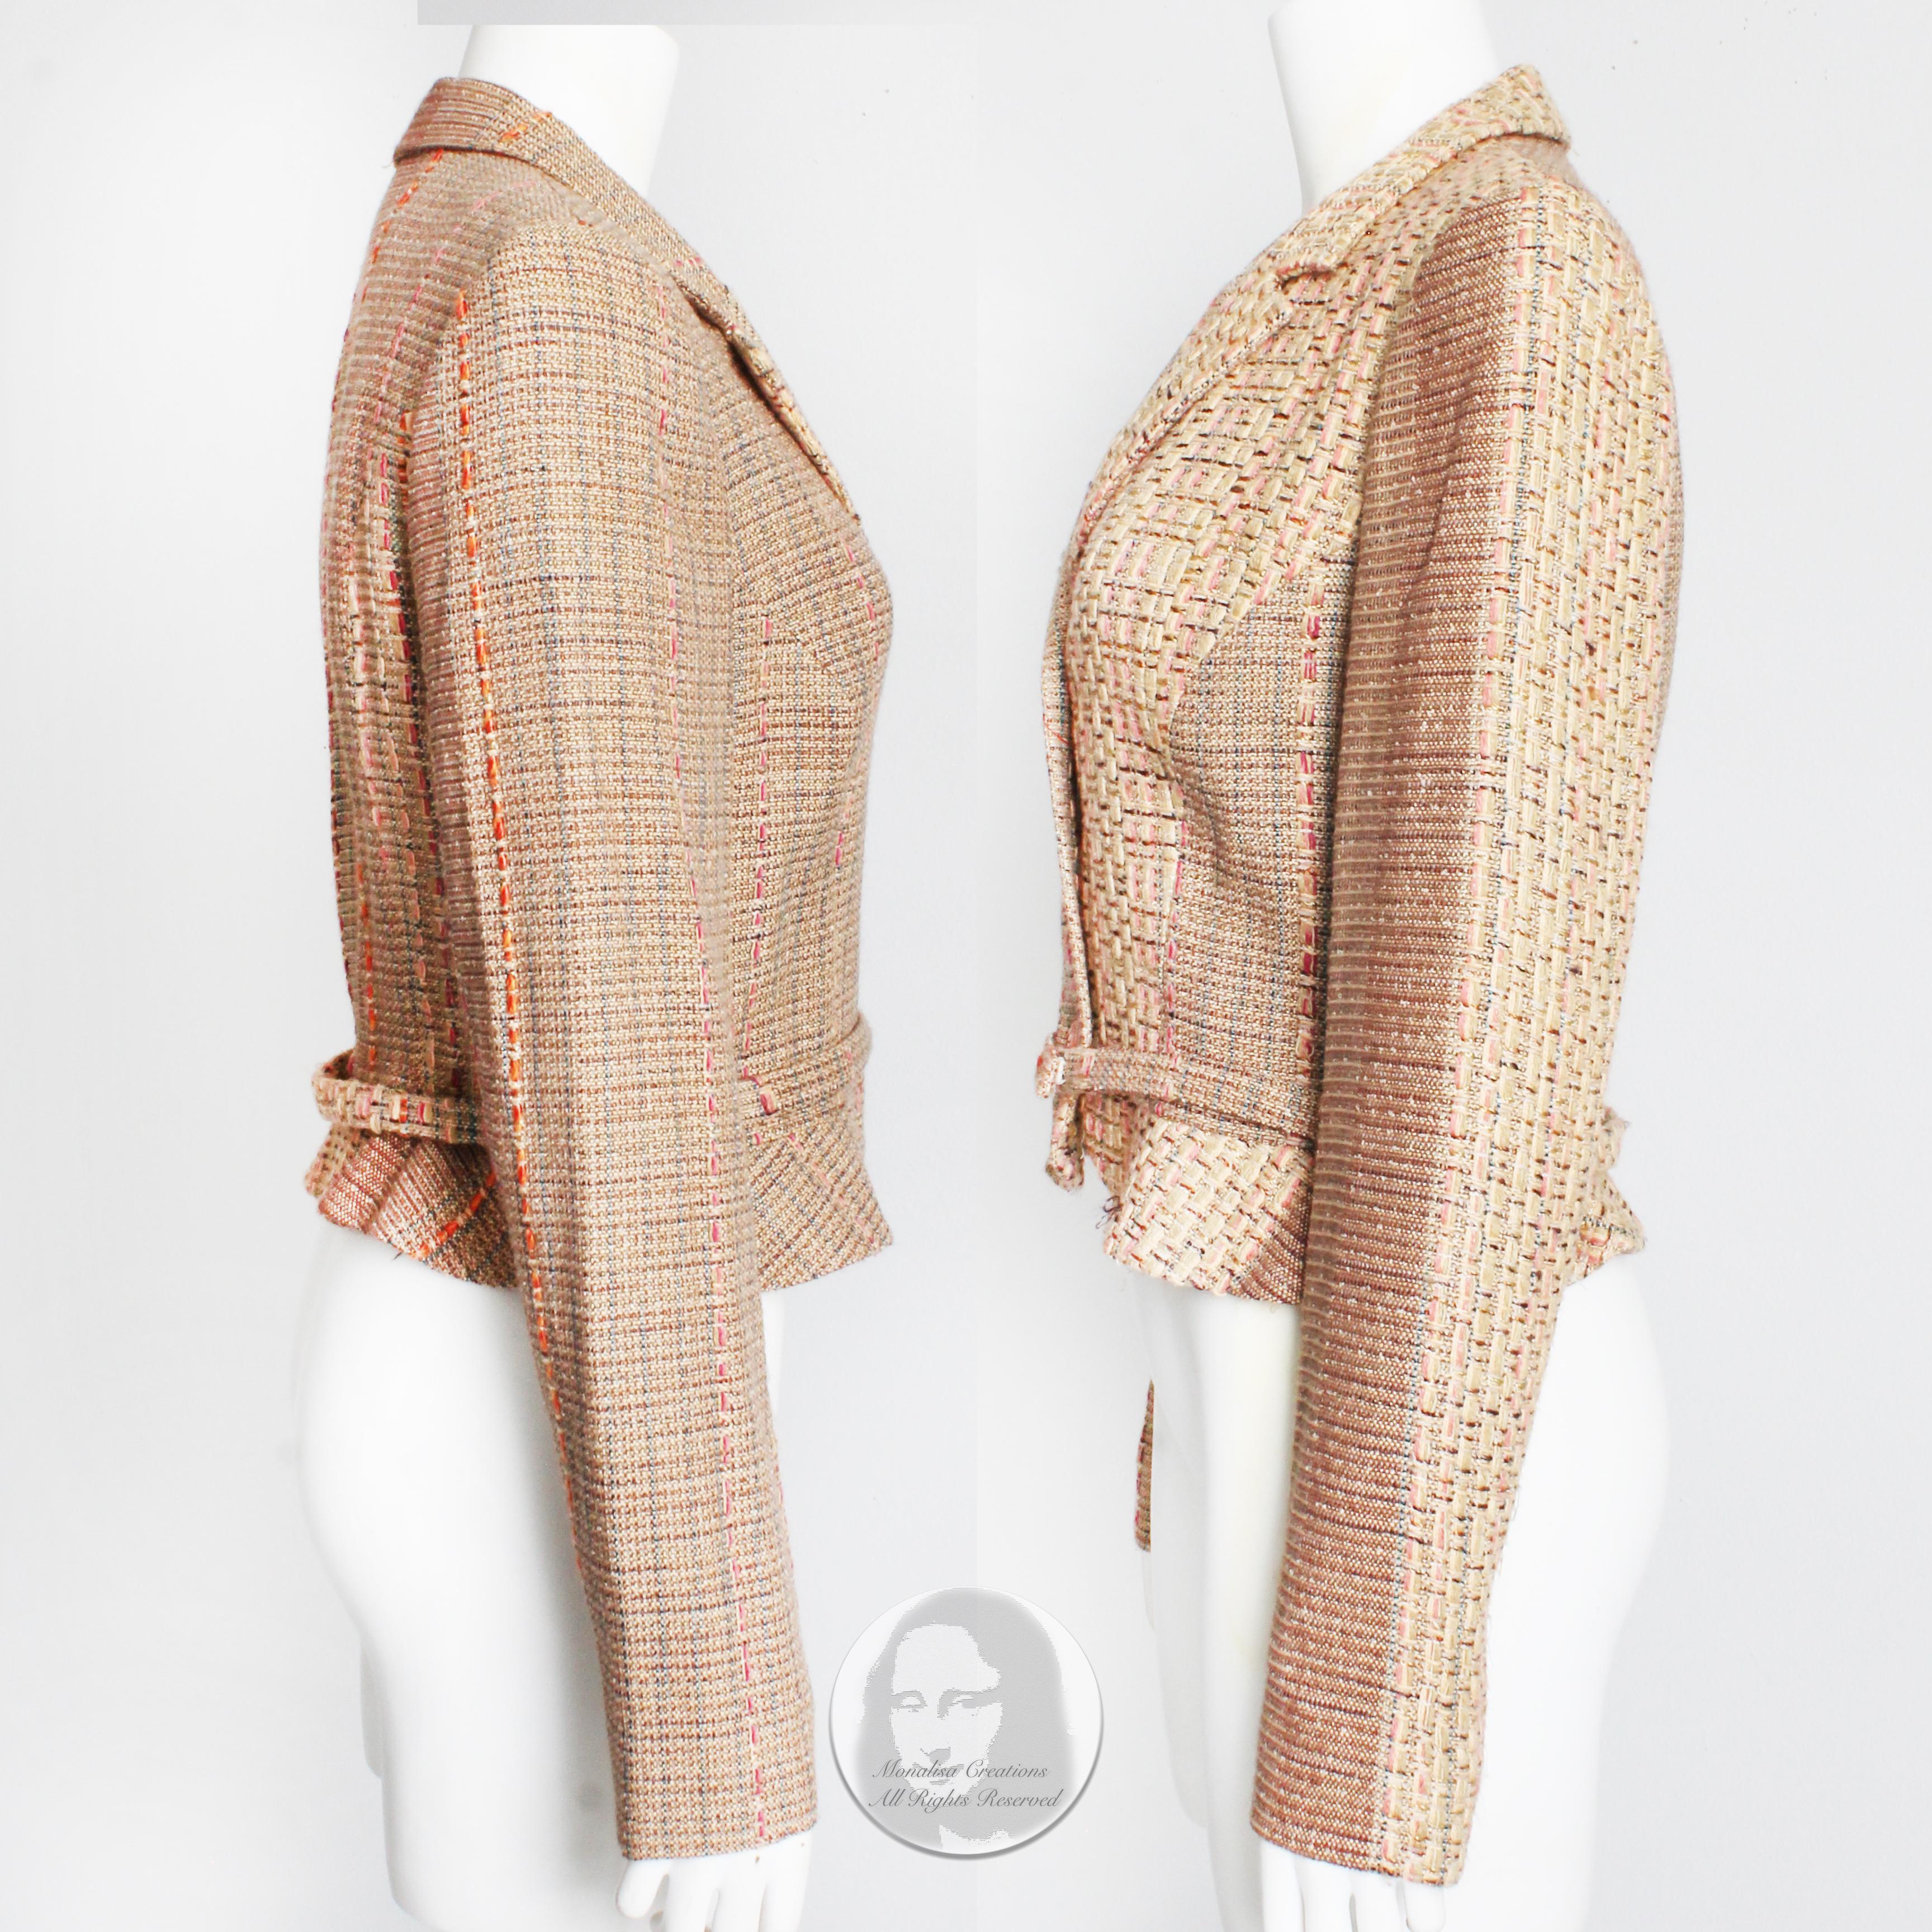 Christian Lacroix Jacket Multicolor Silk Blend Tweed Cropped + Matching Belt 42 In Good Condition For Sale In Port Saint Lucie, FL